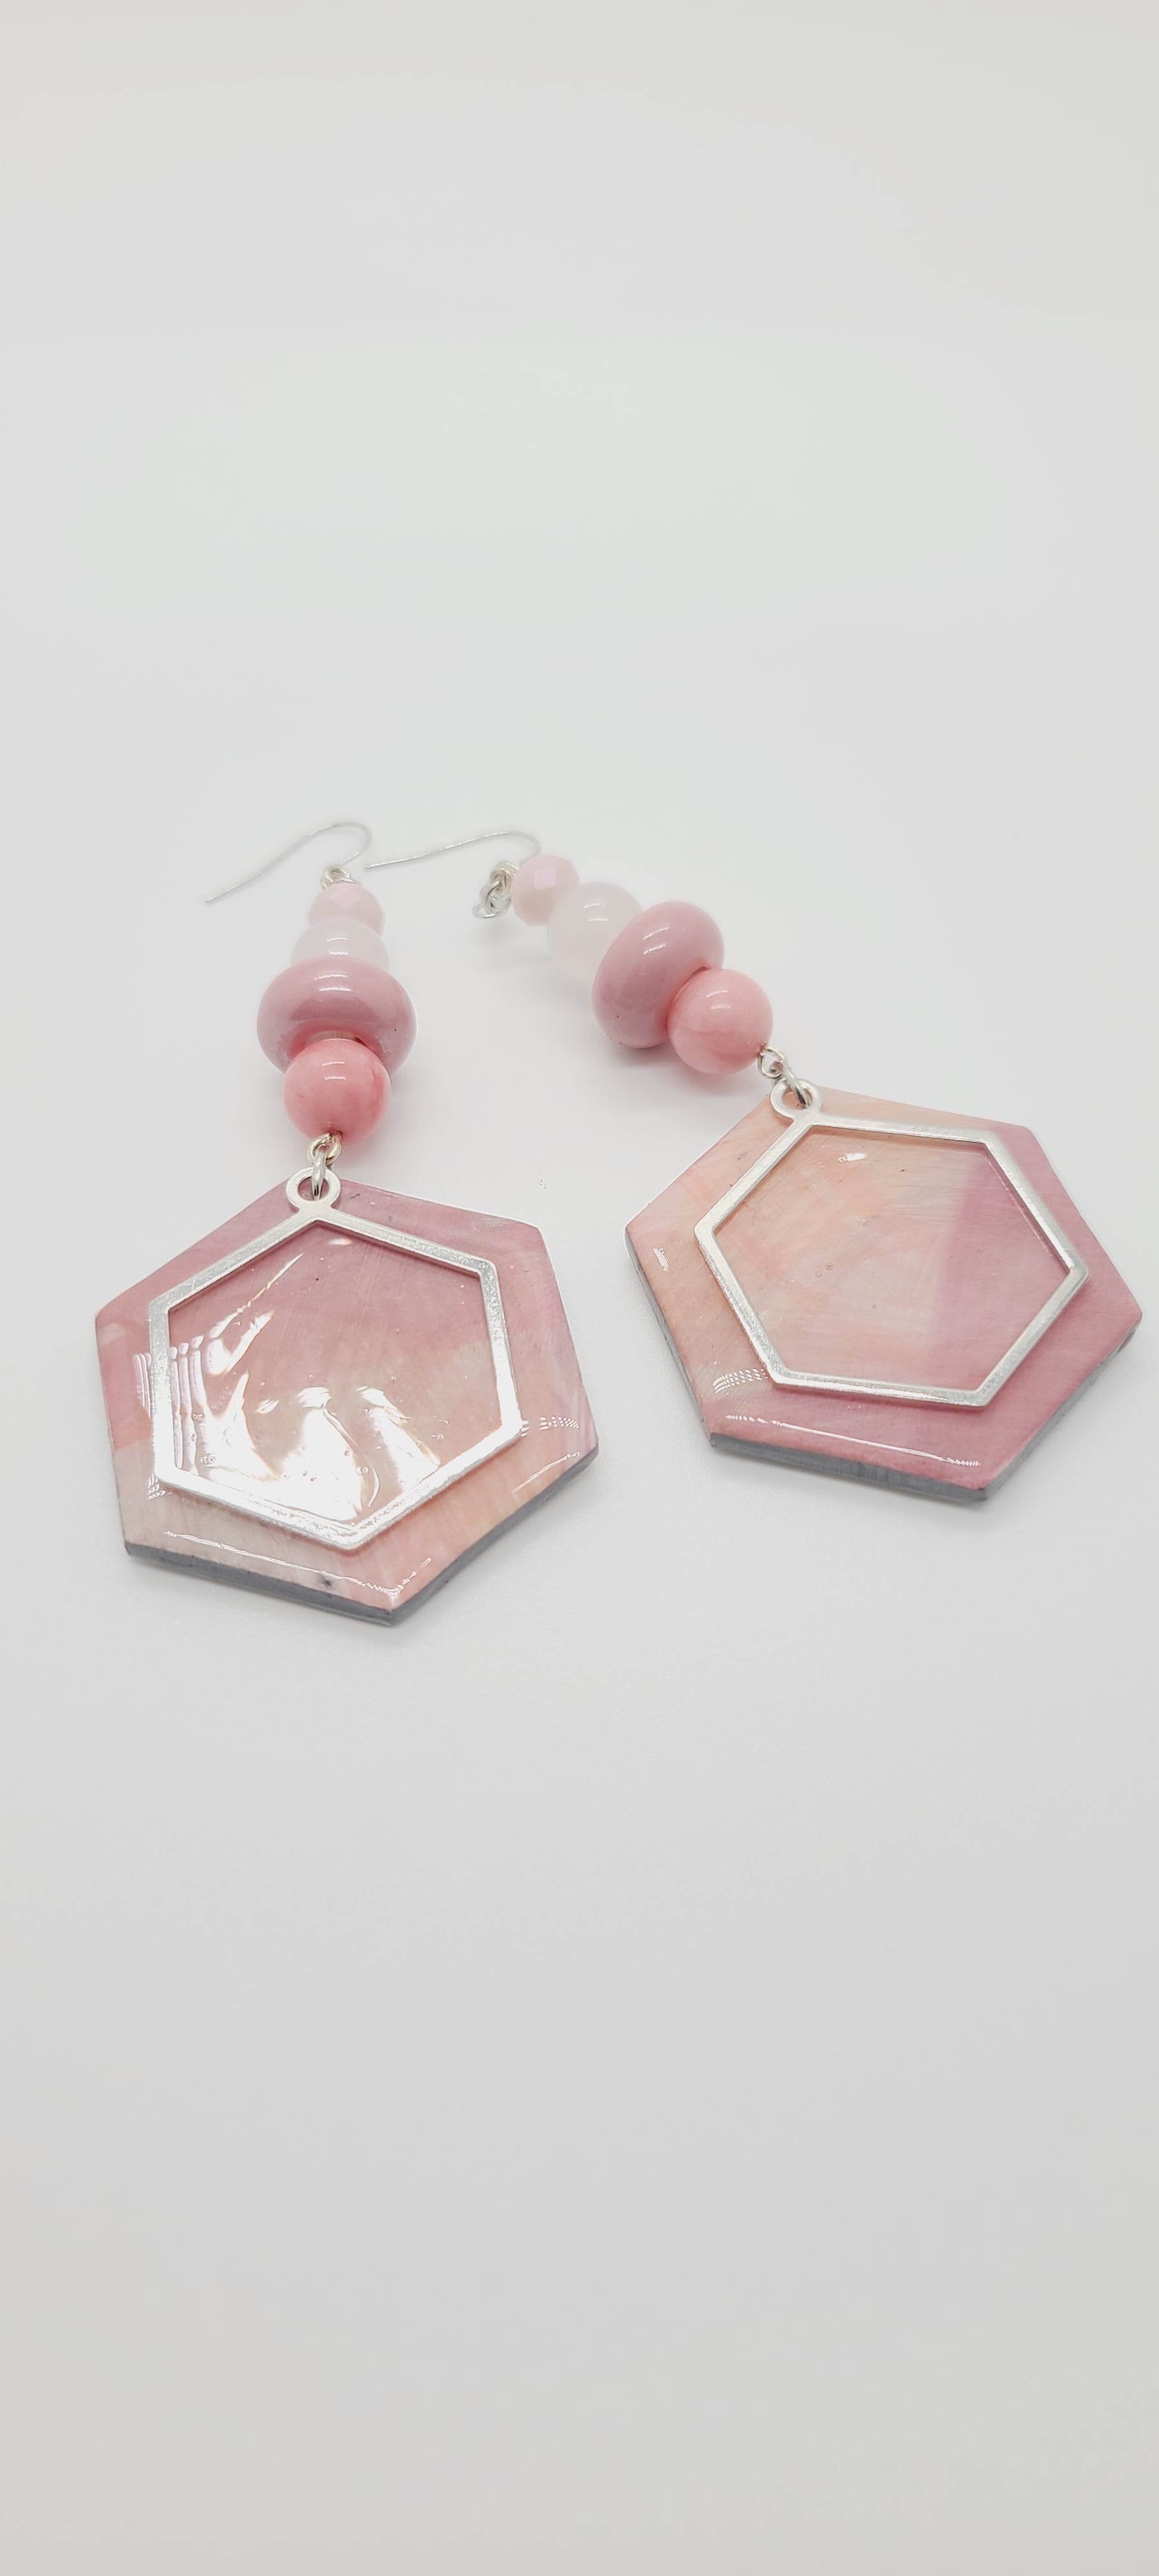 Length: 4 inches | Weight: 1.1 ounces  Distinctly You! These earrings are made with hexagon shapes and charms using polymer clay in pink and white, 10mm pink and frosted white glass beads, pink rondelles, and 6mm pink faceted glass stones.